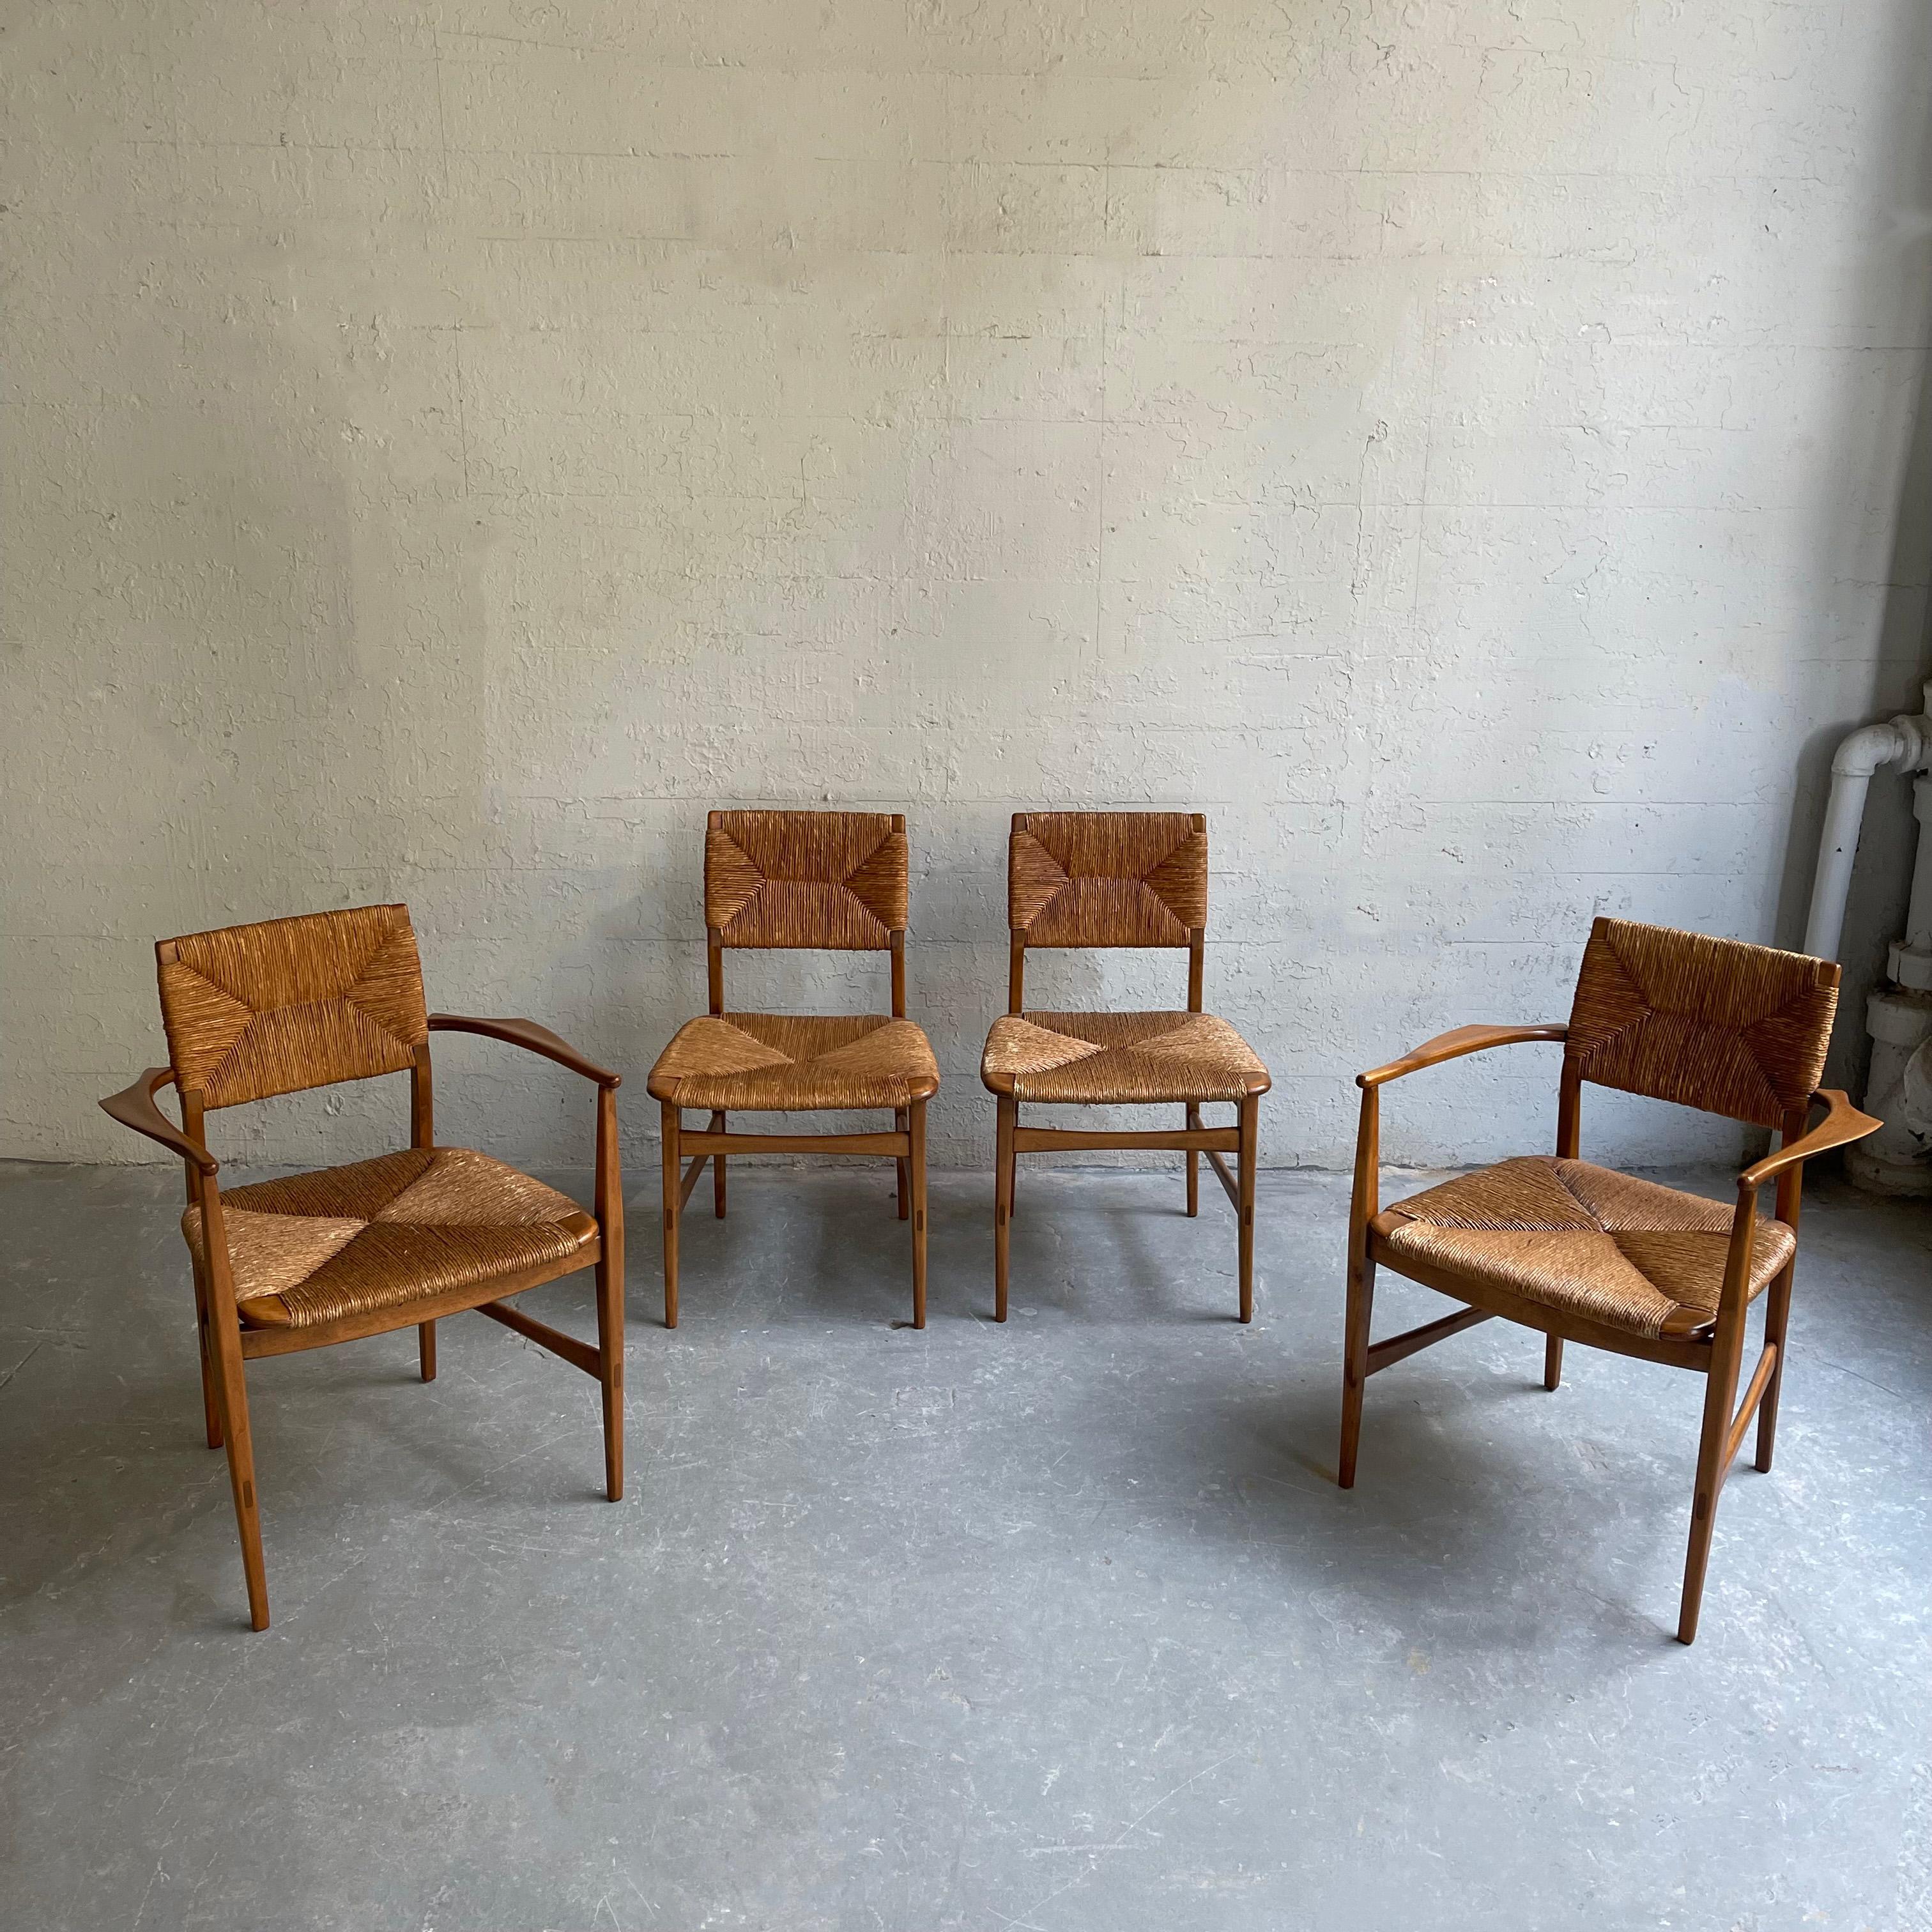 Set of 4, Scandinavian modern, beech wood dining chairs feature woven rush seats and backs. The set consists of 2 captain arrmchairs that measure 23.5 inches w and 2 side chairs that measure 19 inches W.